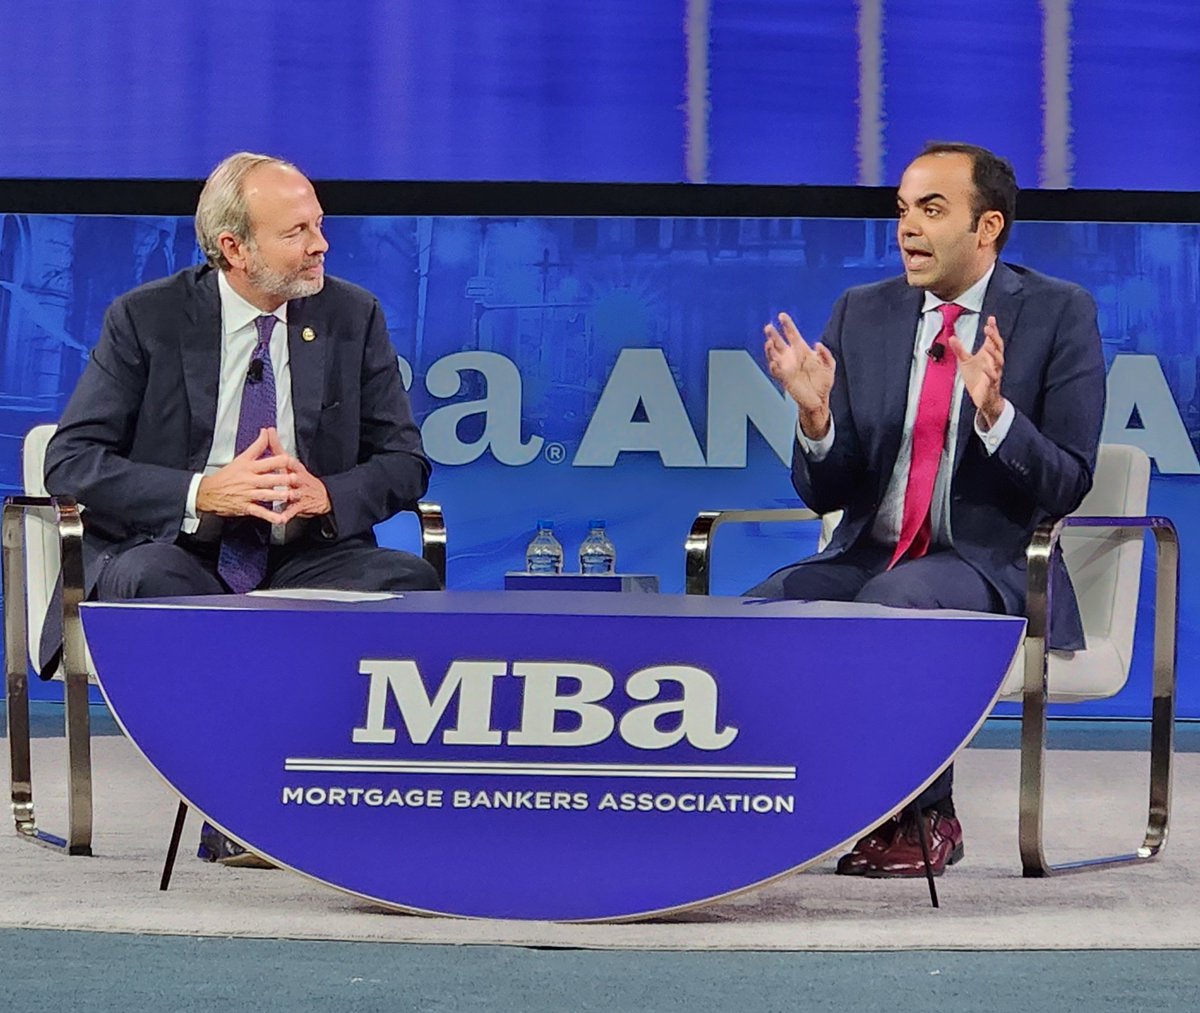 Closing out the American Leadership session, @CFPB Director @chopracfpb has a discussion with @MBAMortgage President and CEO Bob Broeksmit about the recent SCOTUS hearing on the agency's funding, Basel III, #appraisalbias, among other things. #MBAAnnual23